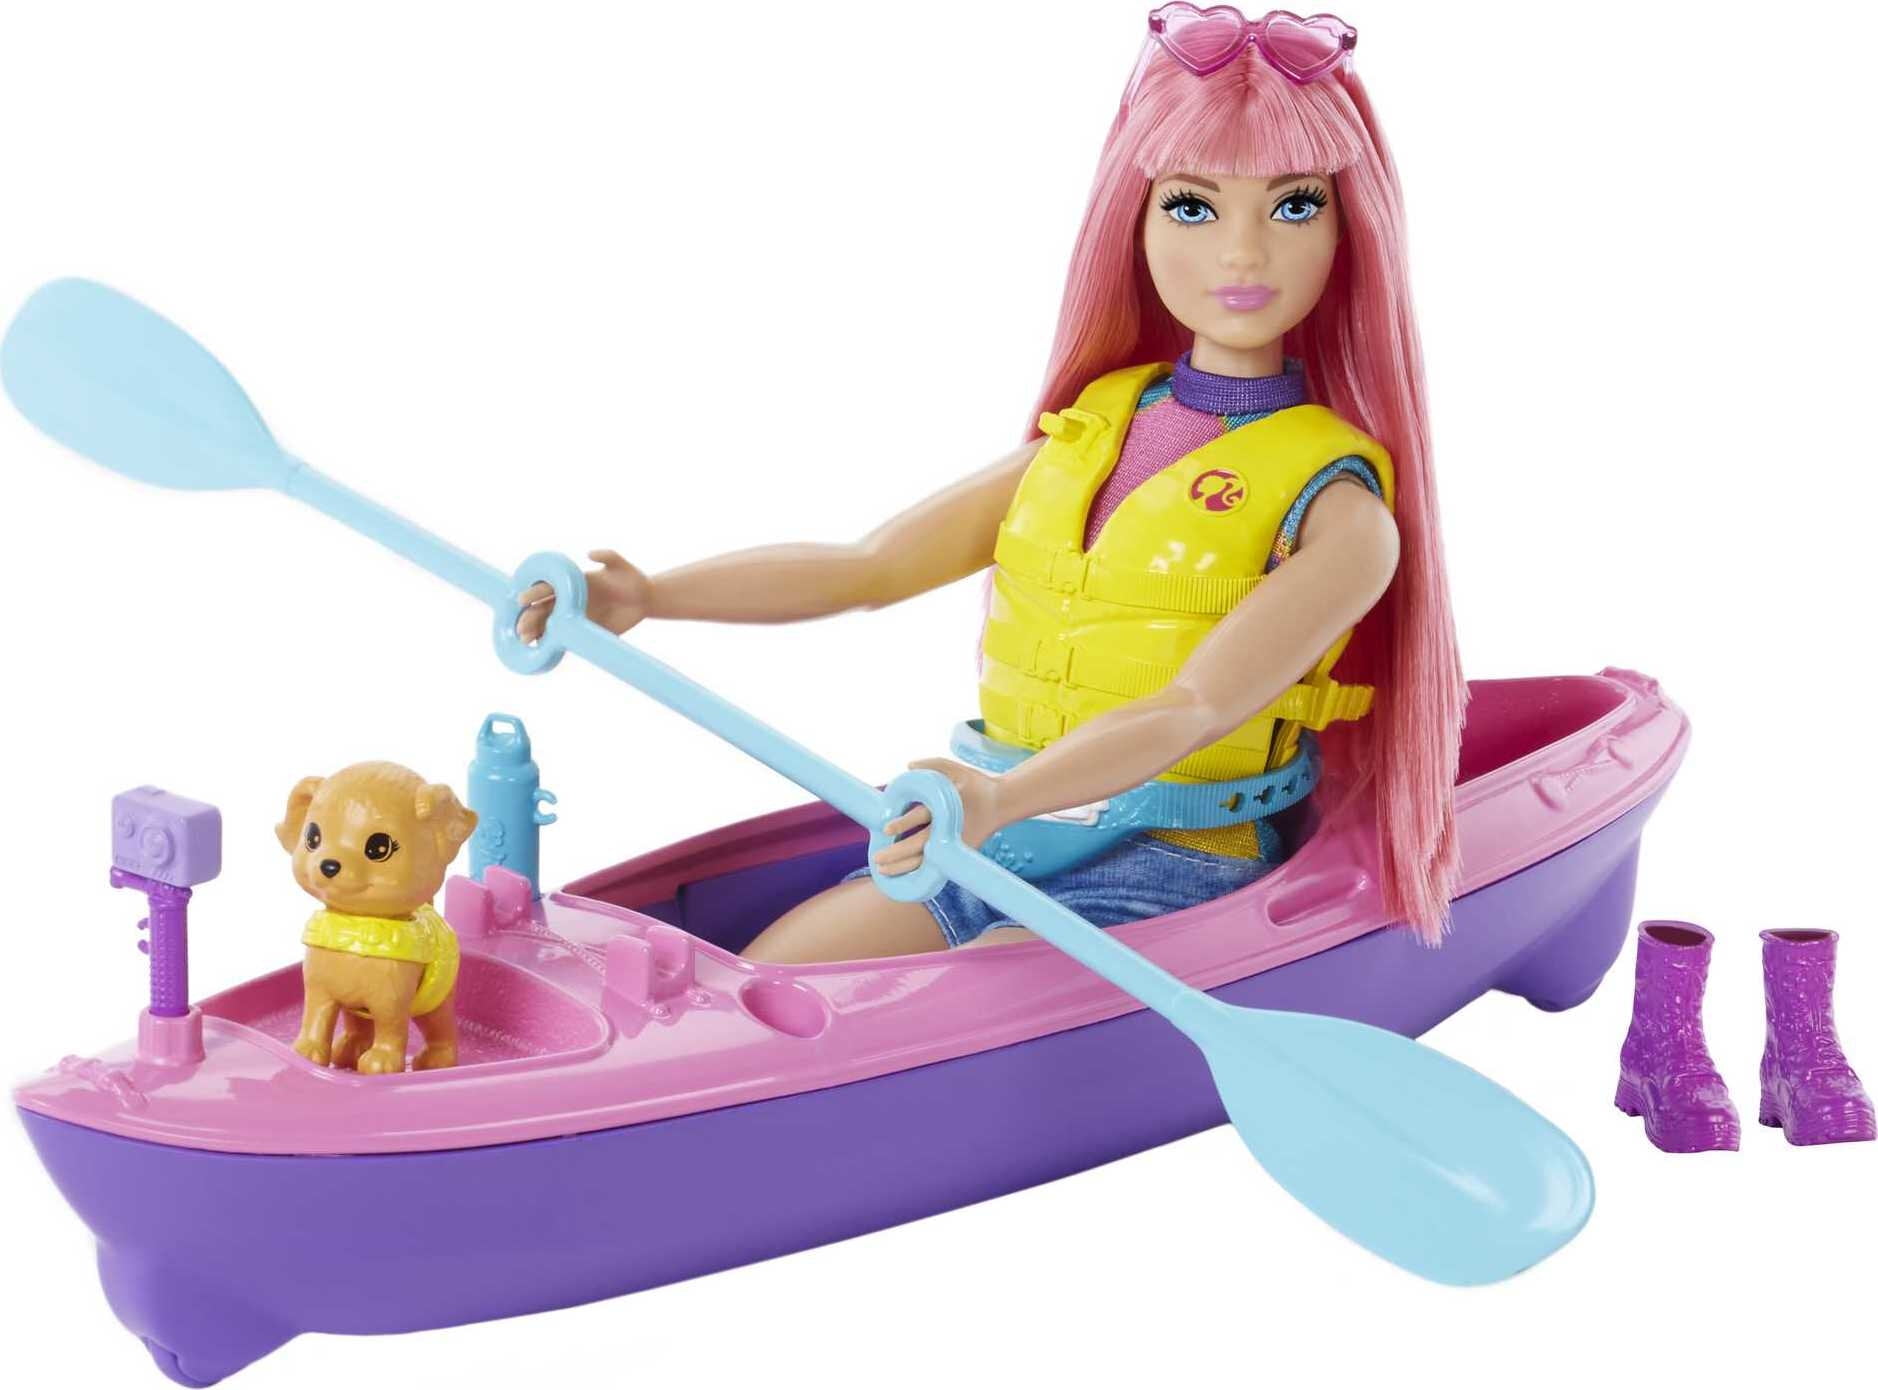 Barbie It Takes Two Daisy Camping Doll with Pet, Kayak & Accessories, 3 to 7 Year Olds